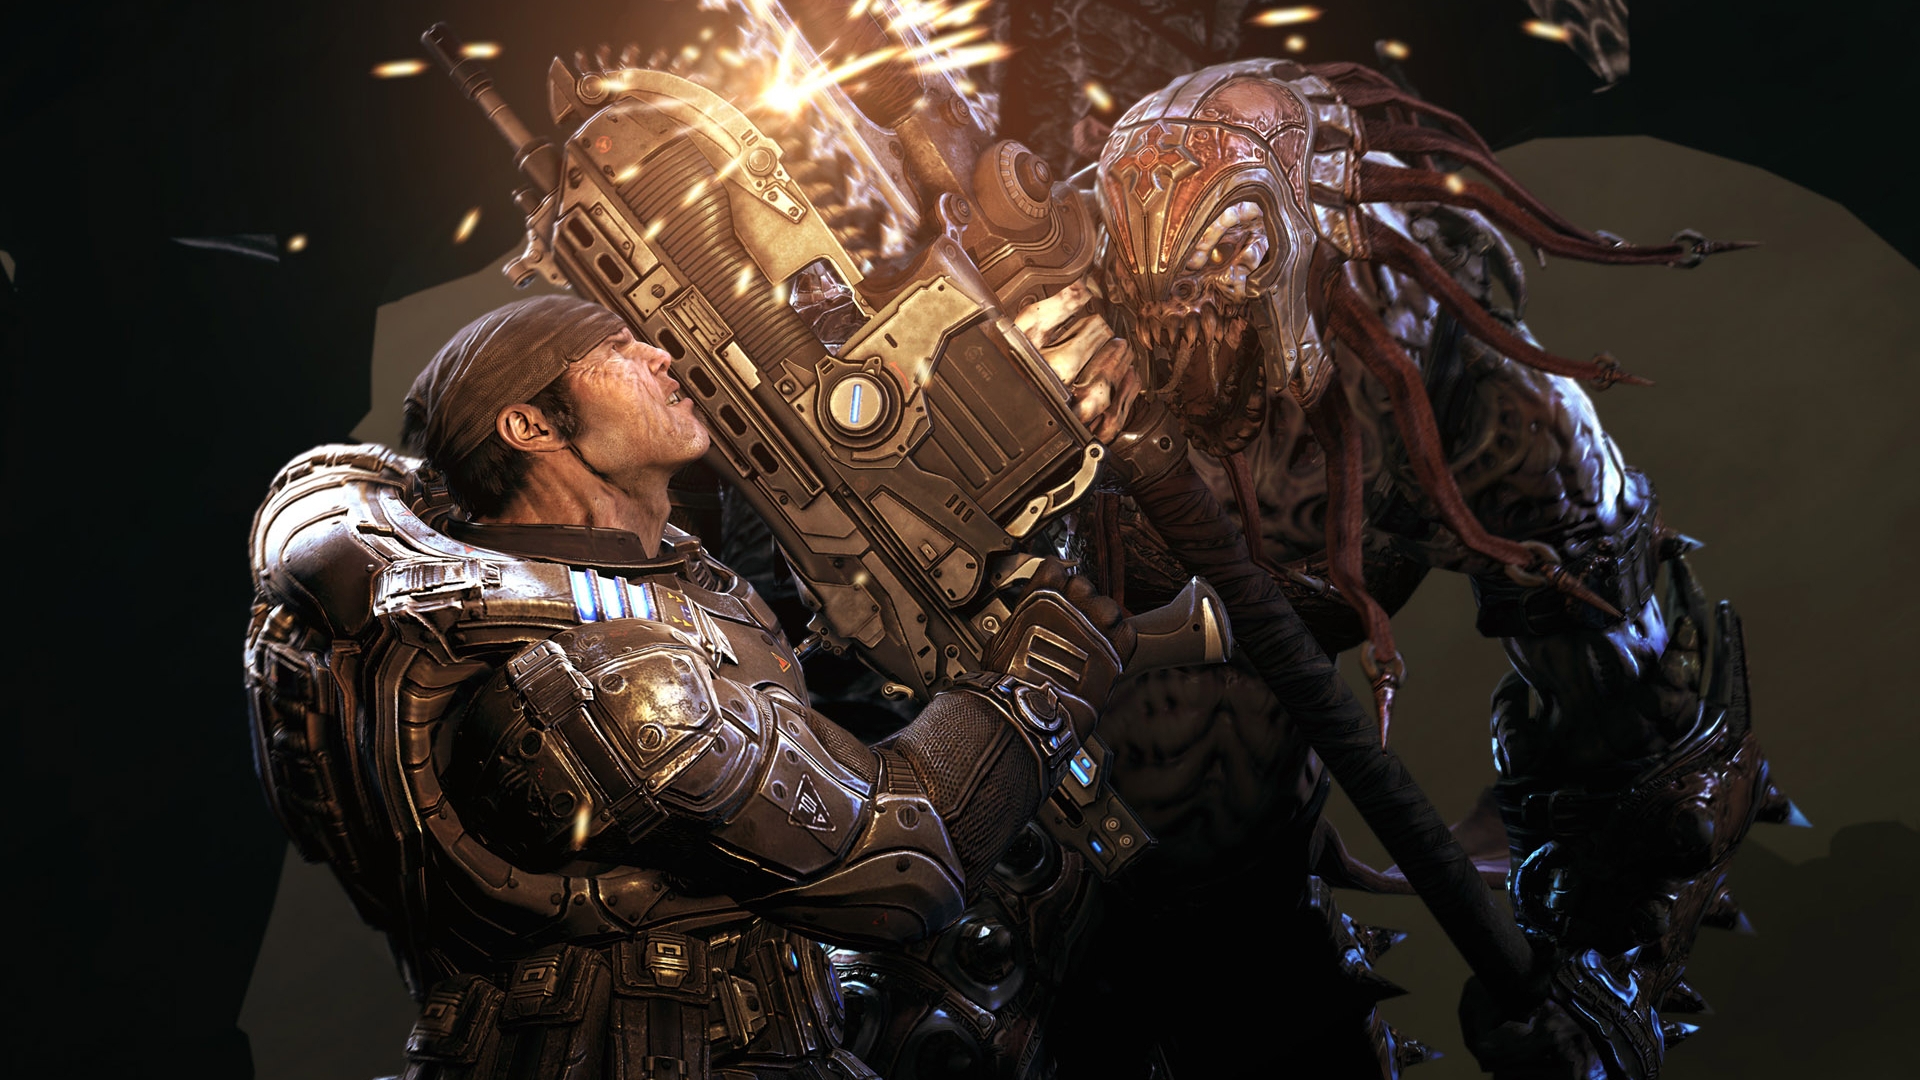 Gears of War 2 for 1920 x 1080 HDTV 1080p resolution